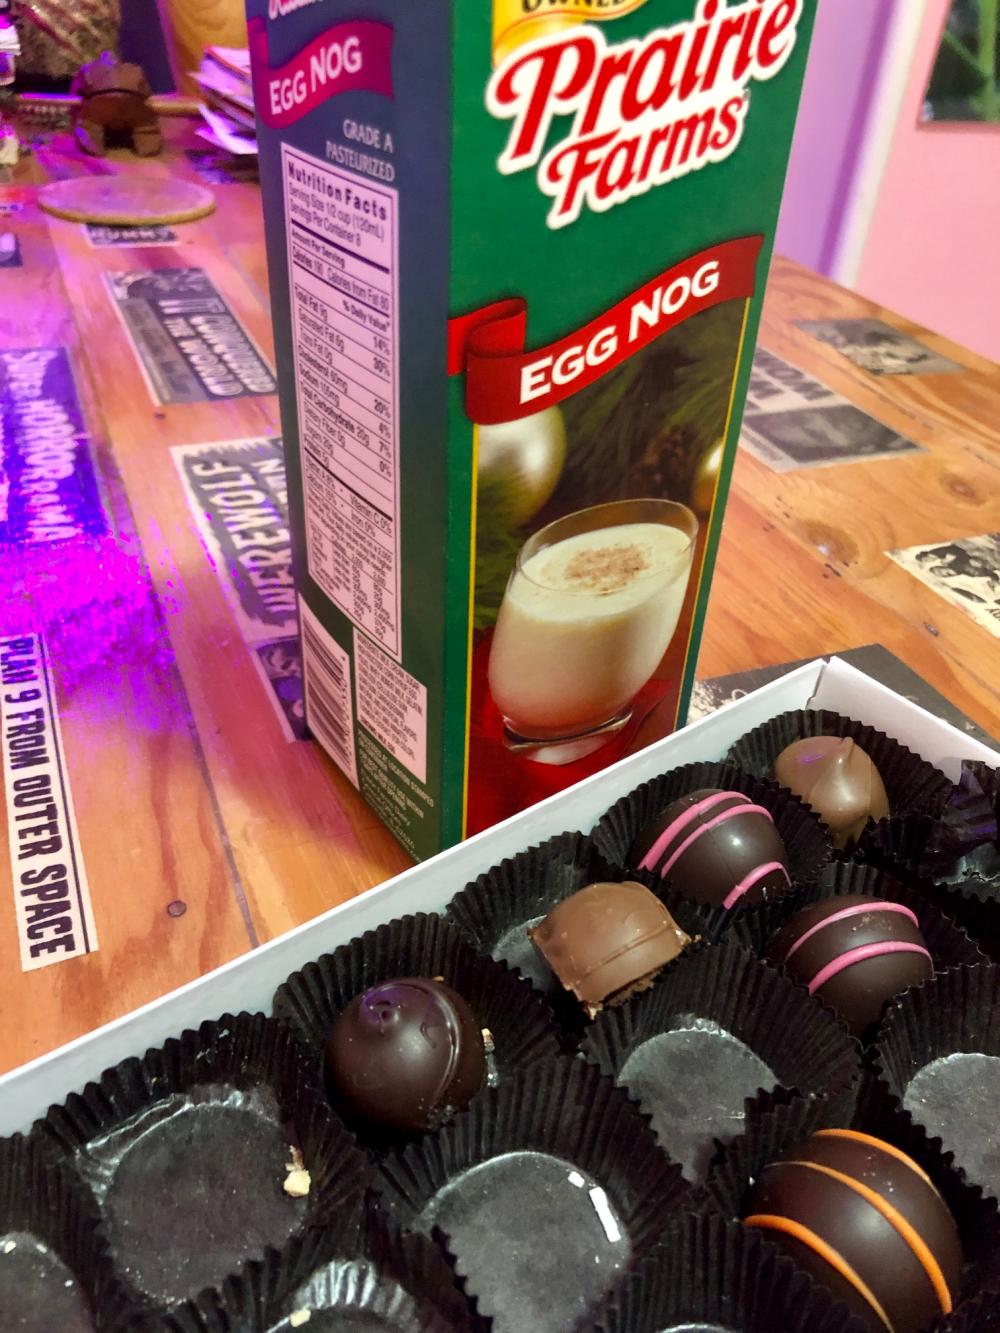 Chocolates and eggnog for dinner